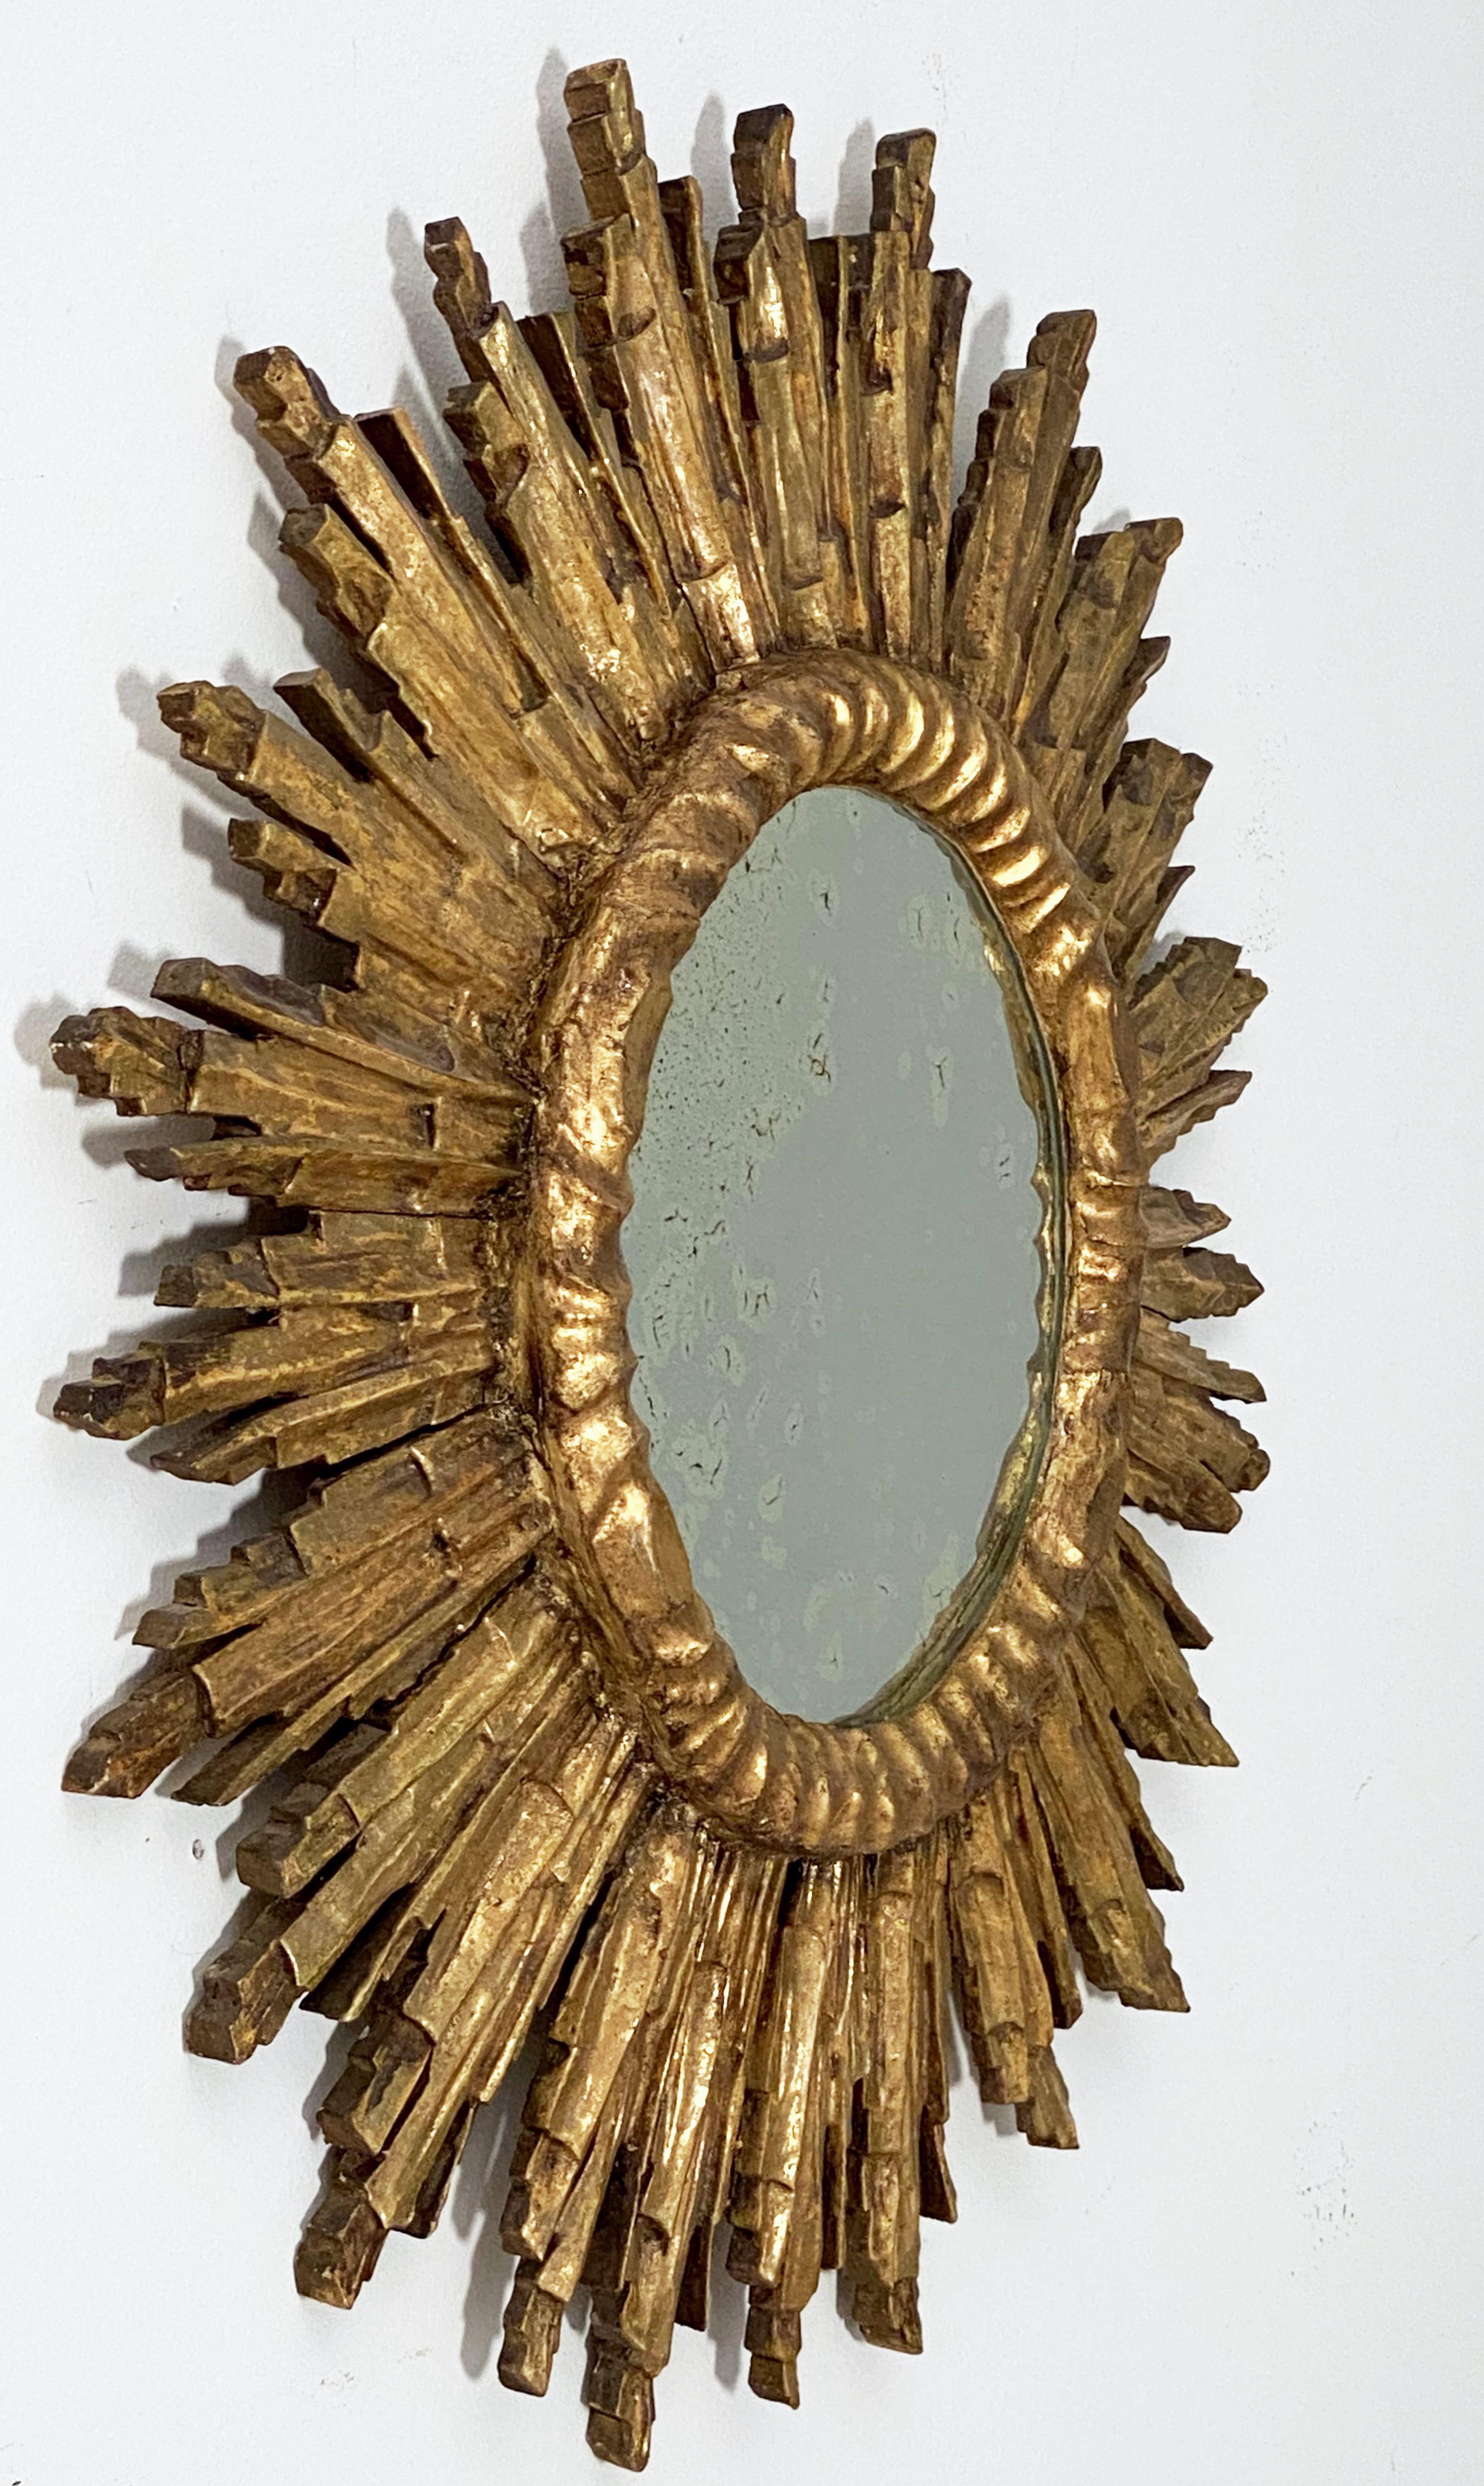 A lovely large French gilt sunburst or starburst mirror with original mirrored glass center in moulded frame. 

Measure: Diameter of 27 1/2 inches.